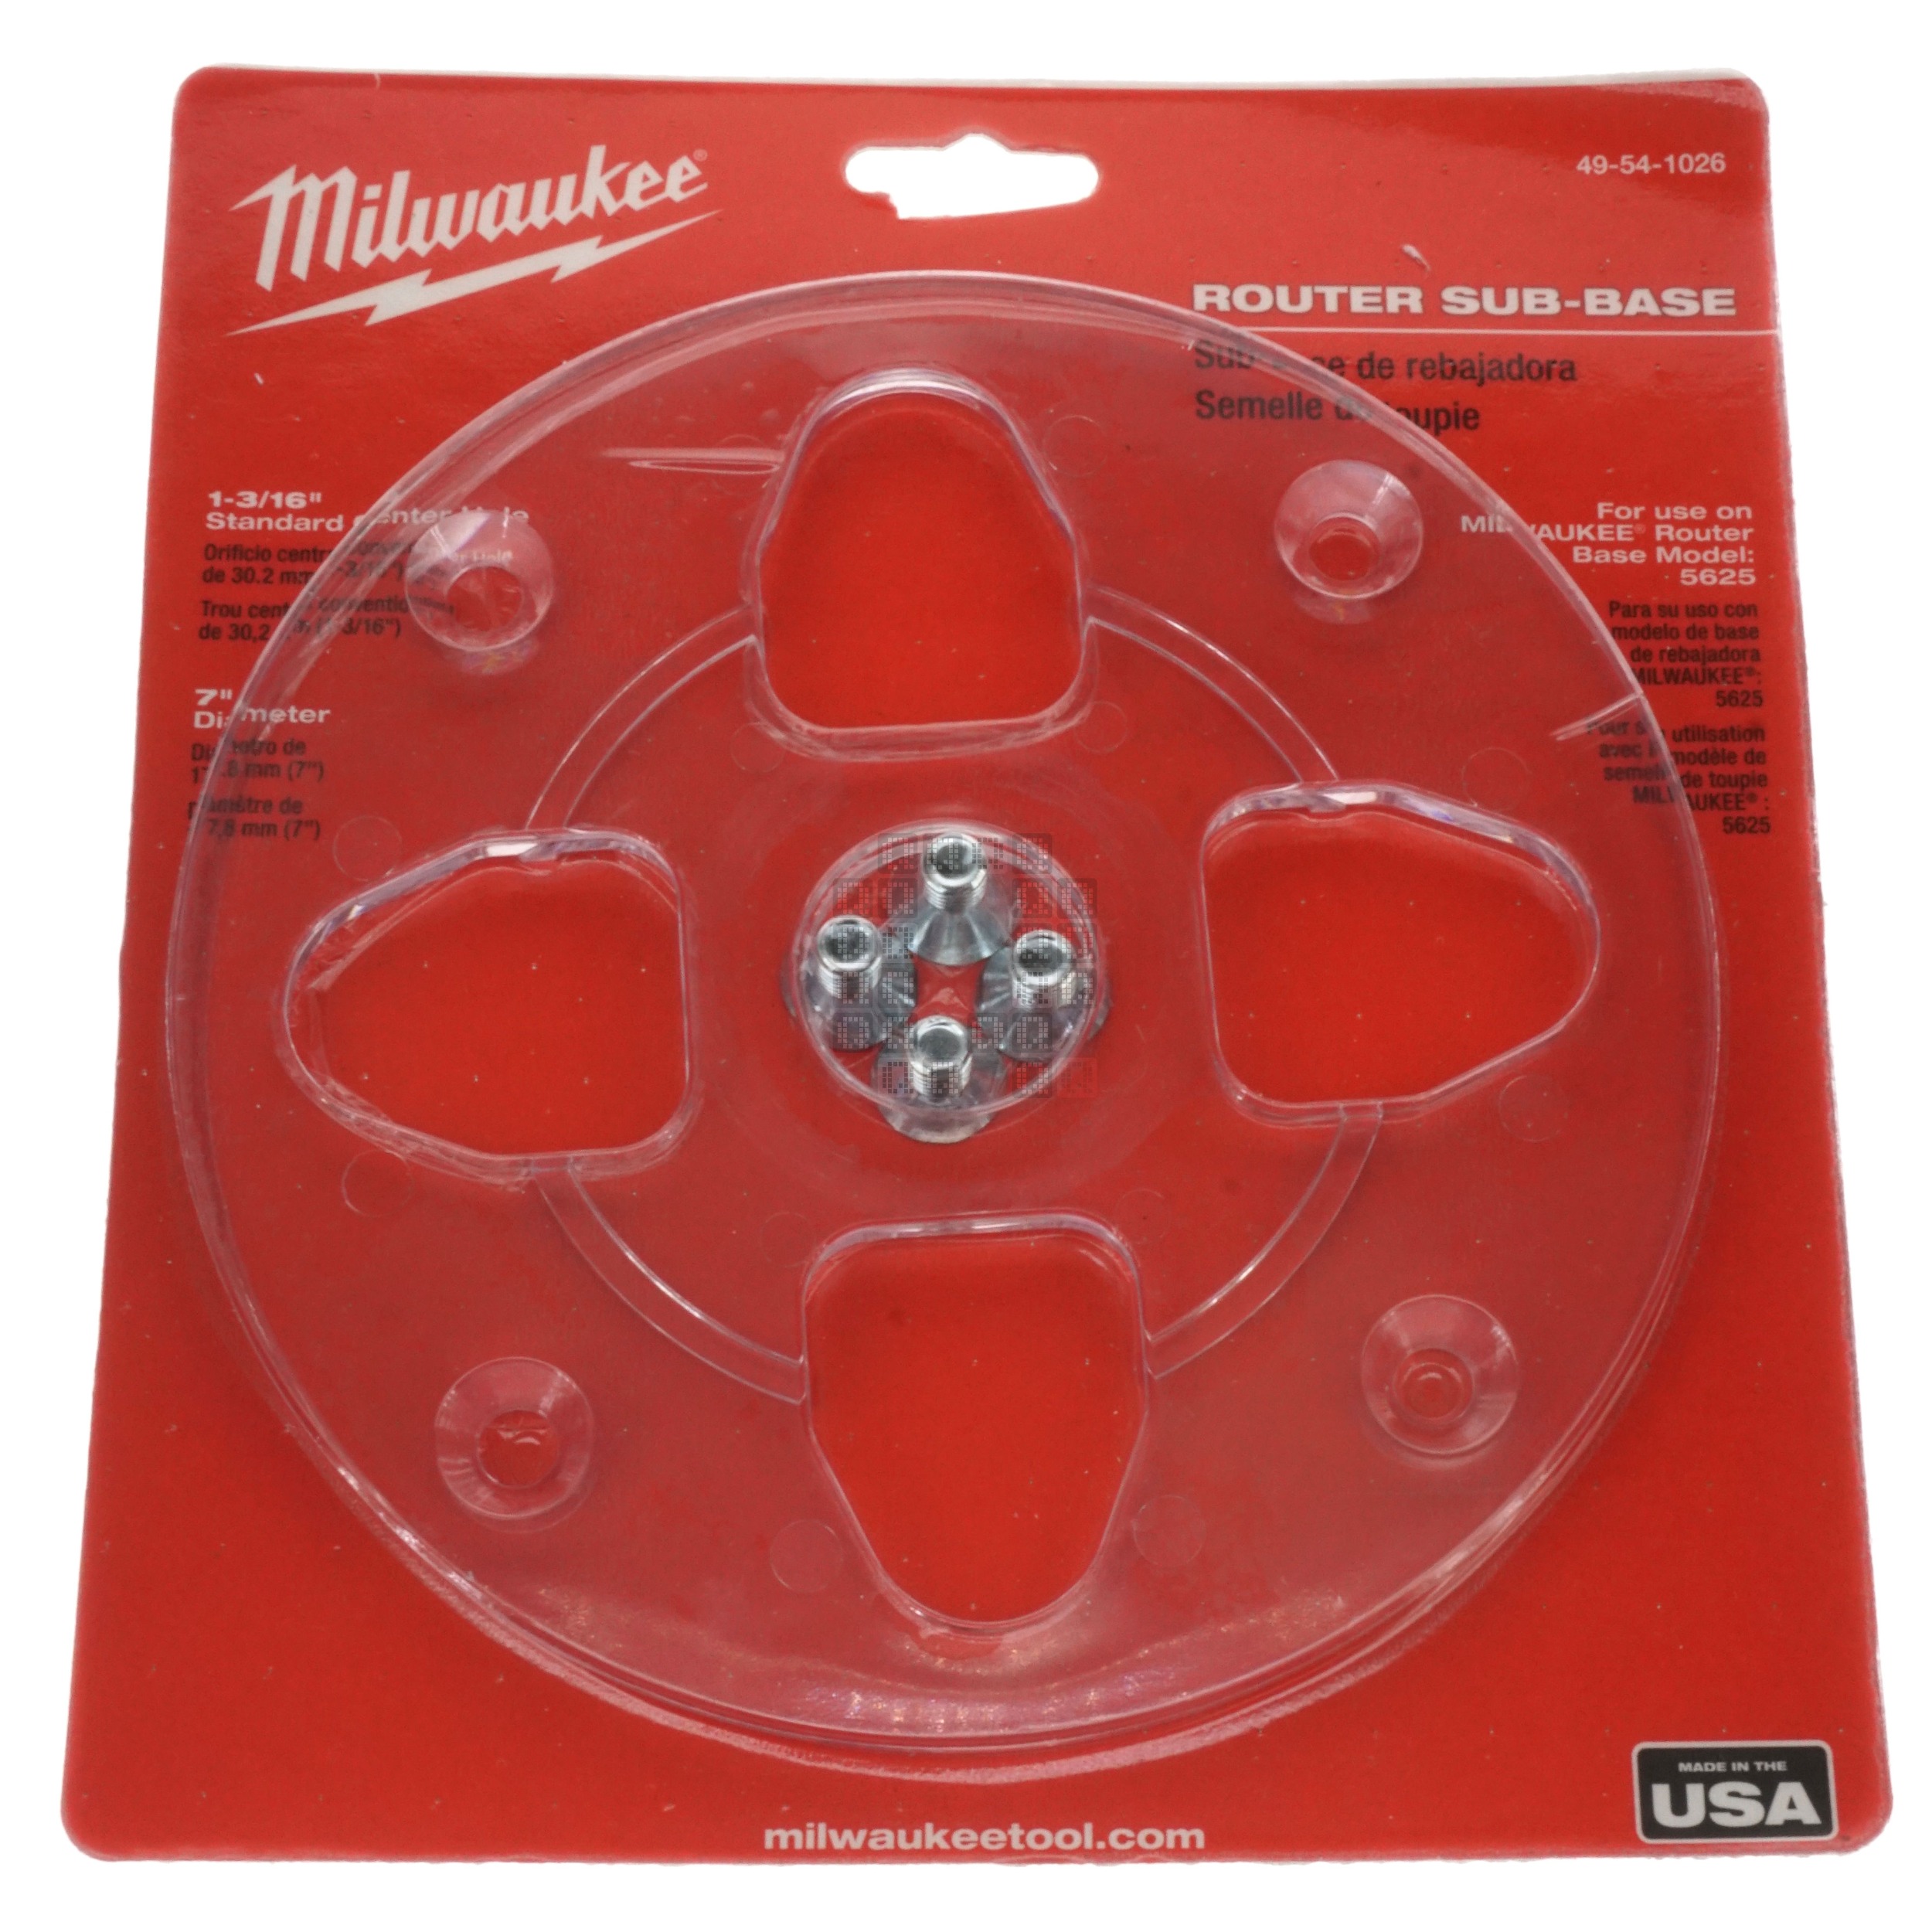 Milwaukee Tool 49-54-1026 Clear Router Sub-Base, 7" Diameter, 1-3/16" Standard Center Hole